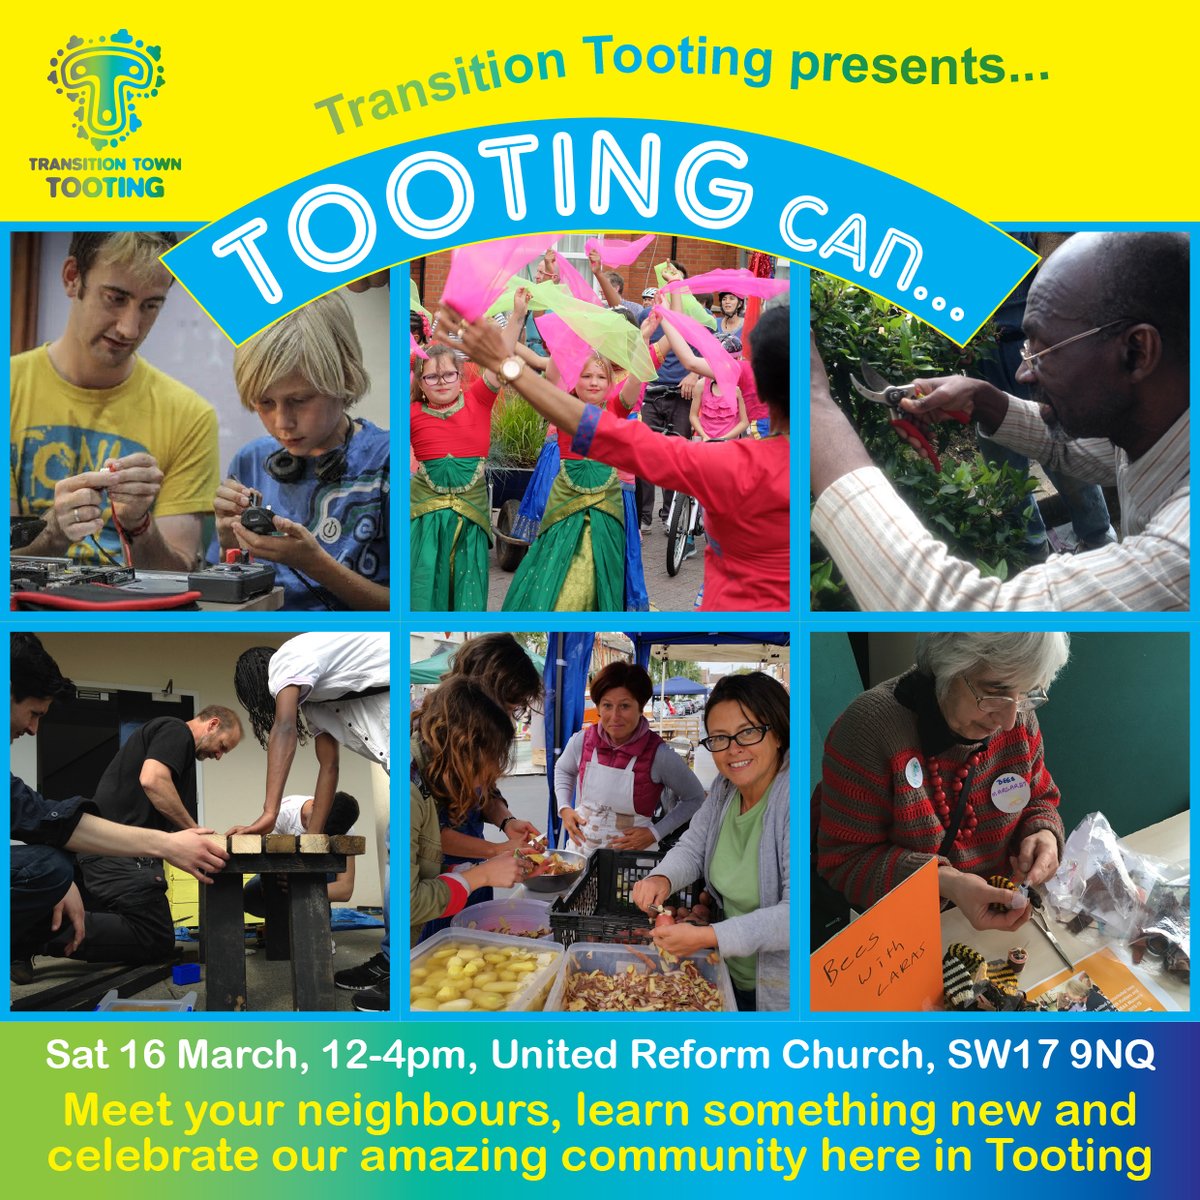 What amazing things can we in Tooting do? What skills could you share? Cooking, growing, sewing, dancing, making, mending and more - join us to share skills or learn from others. Meet your neighbours and celebrate our amazing Tooting community ... fb.me/e/3pDaB7320